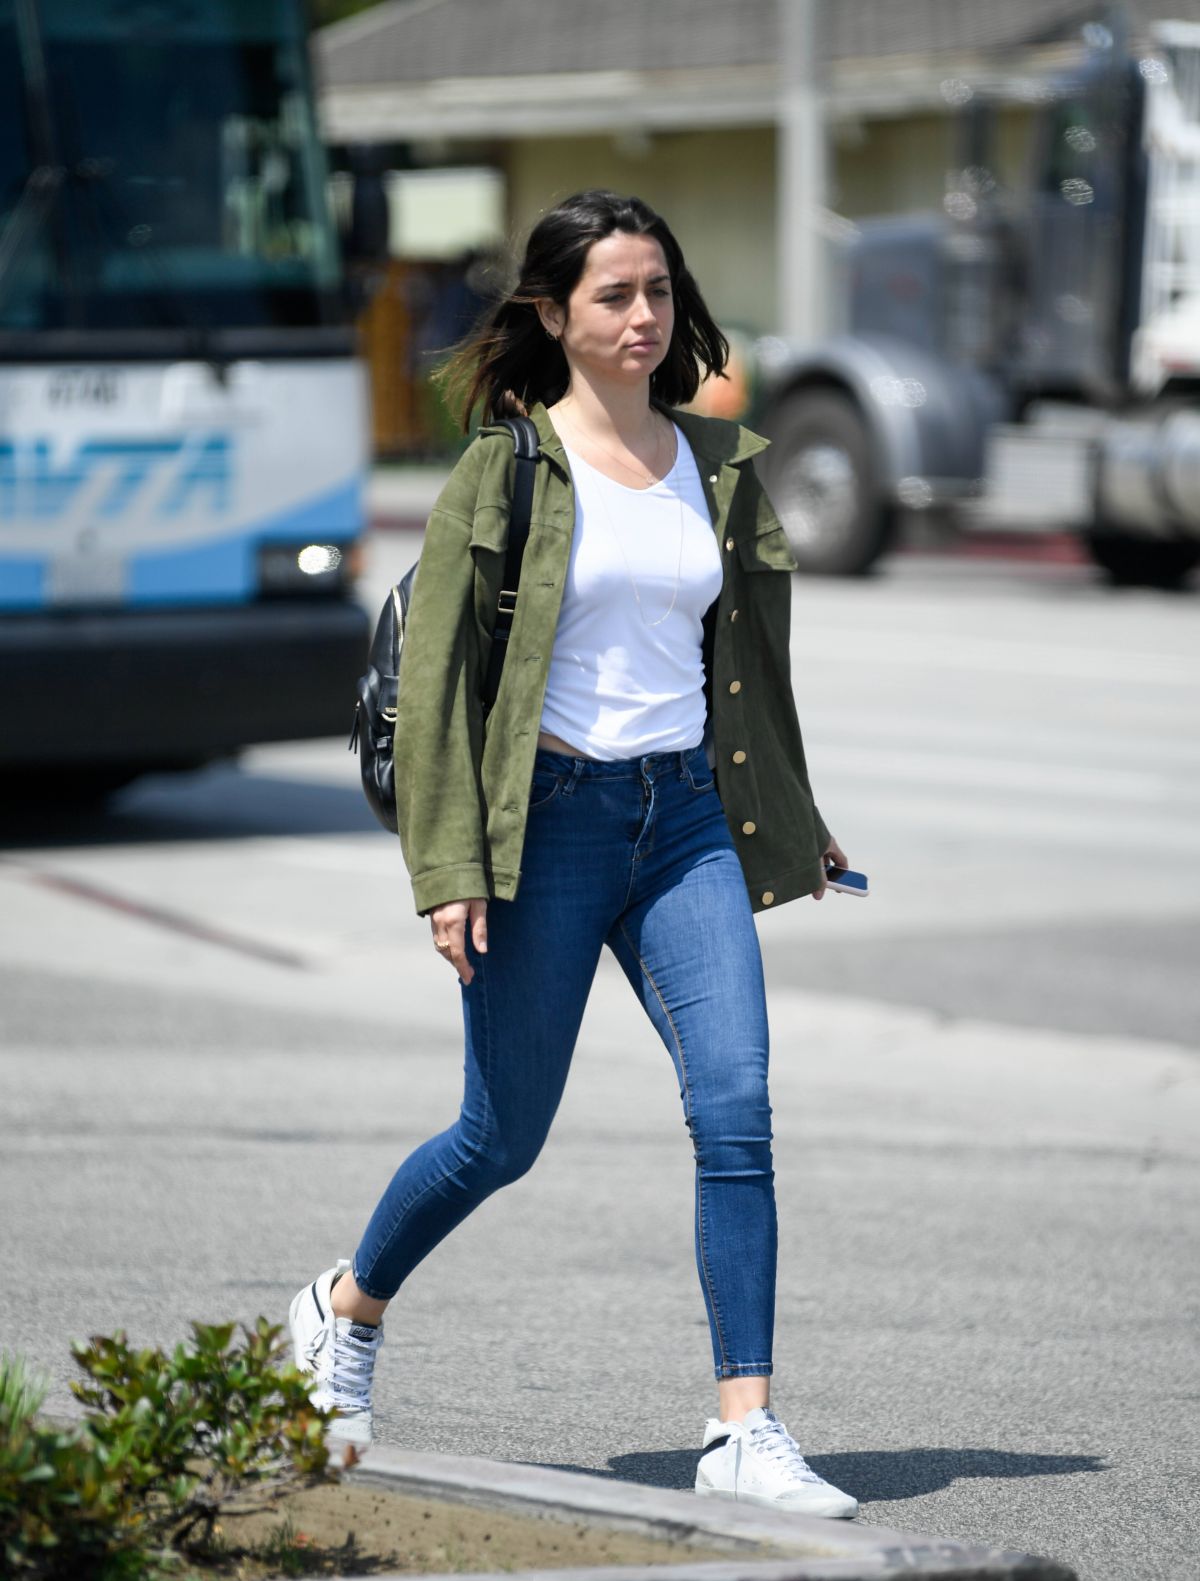 ANA DE ARMAS in Ripped Jeans Out in Los Angeles 06/24/2019 